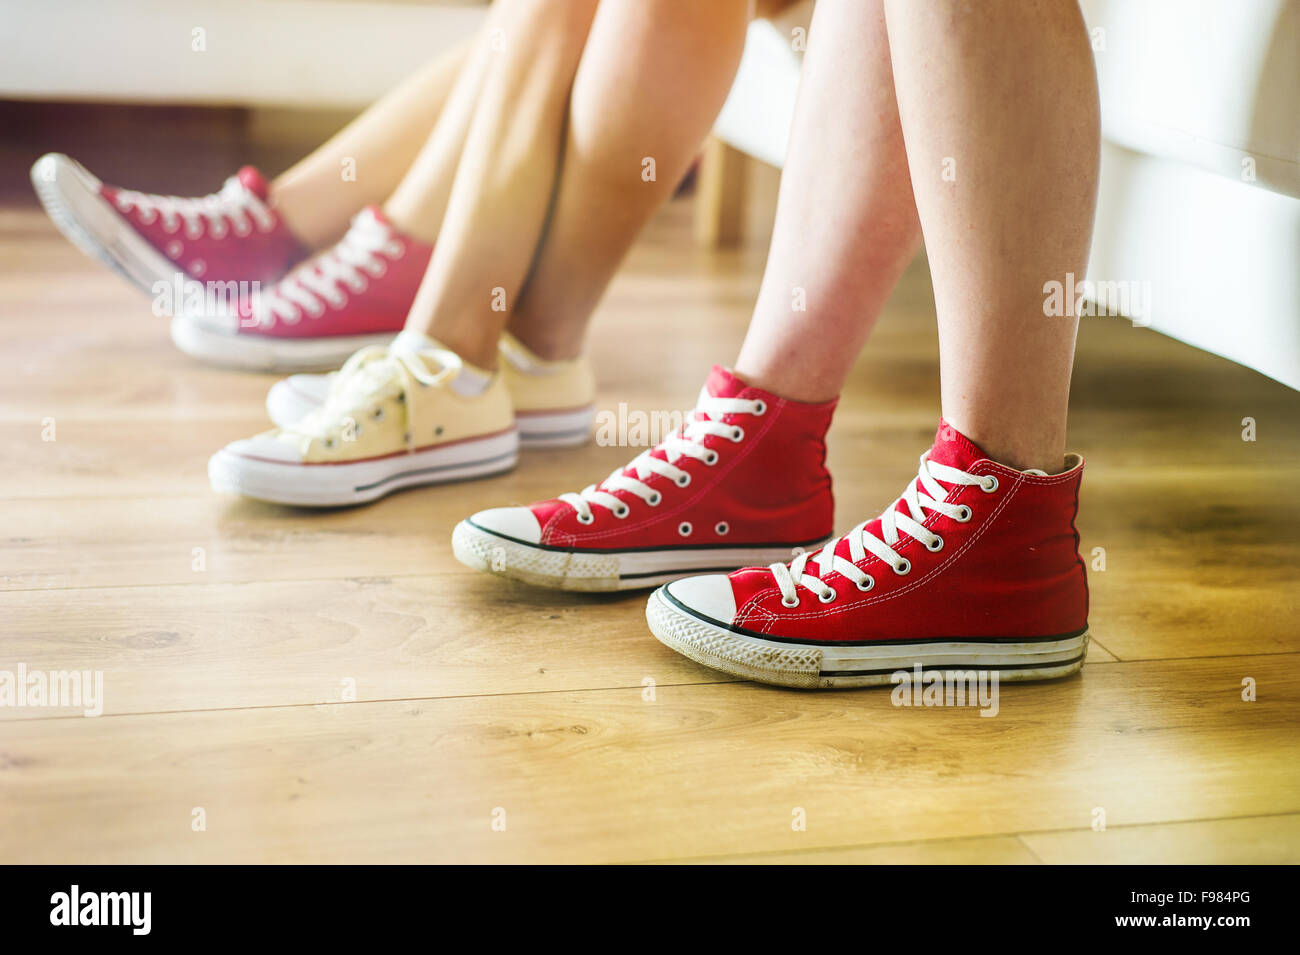 Three young girls sitting on sofa, closup on legs and sneakers Stock Photo